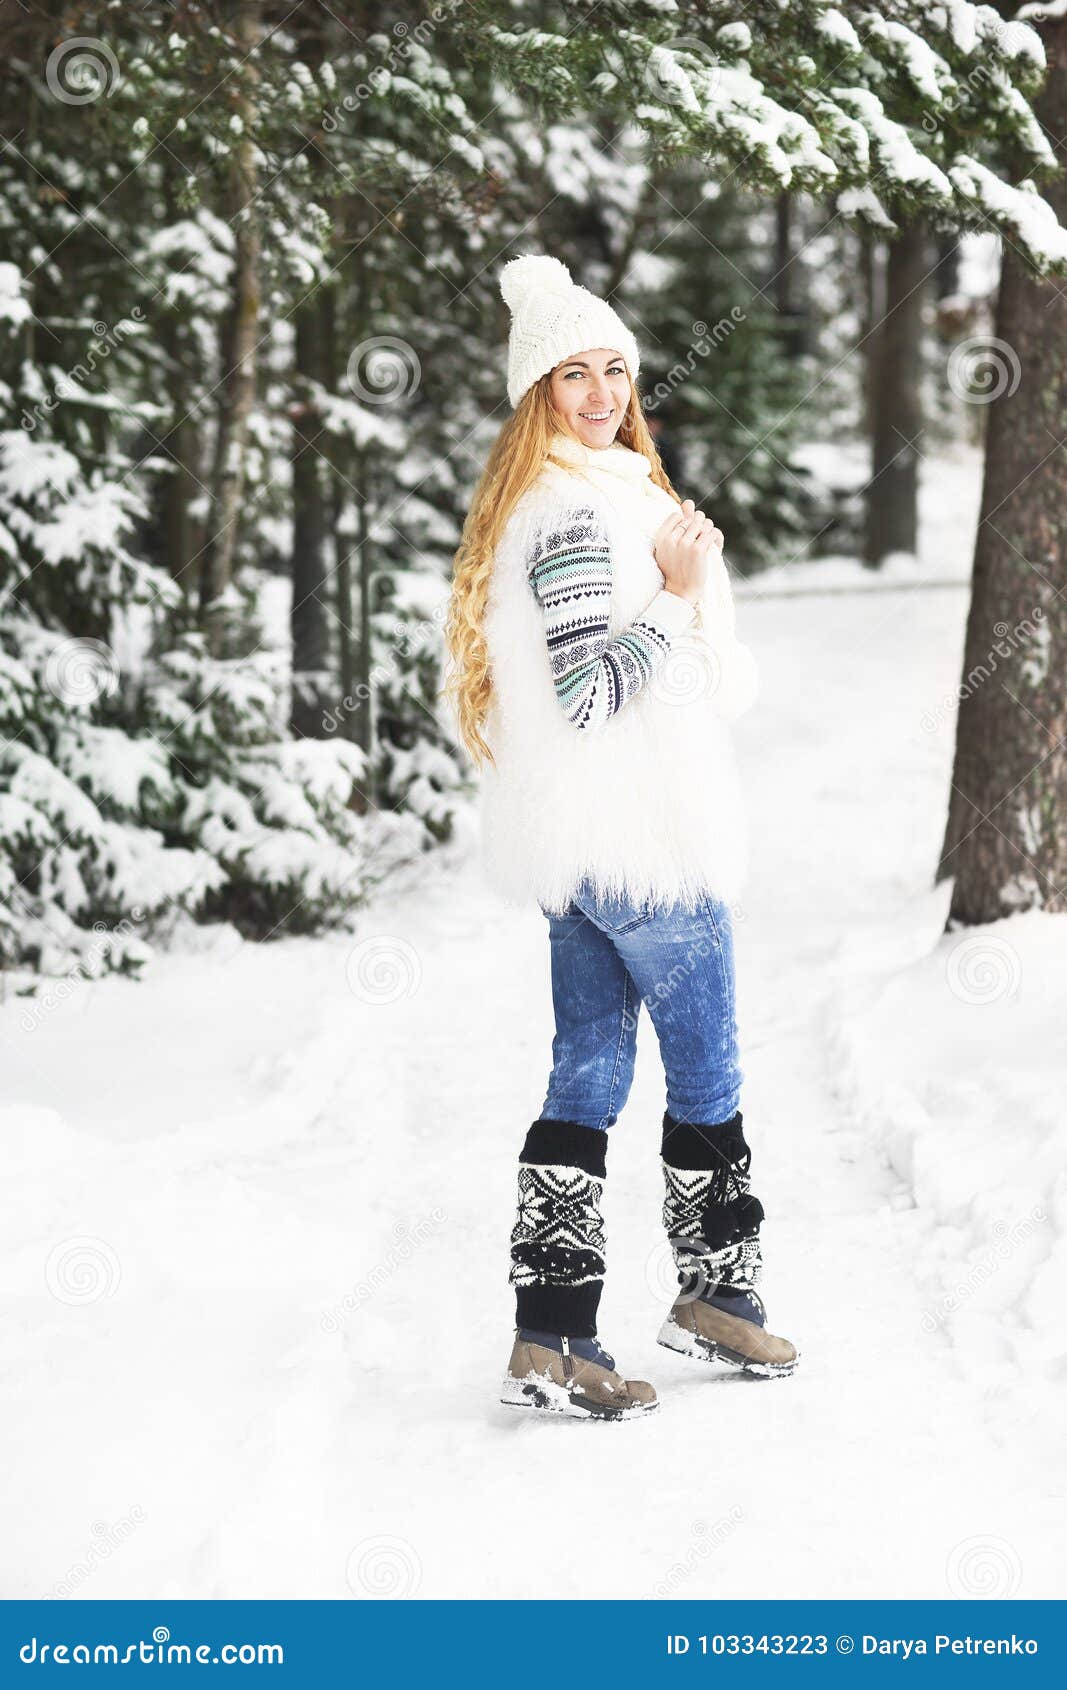 Young Pretty Smiling Girl Outdoors at Winter Forest Stock Image - Image ...